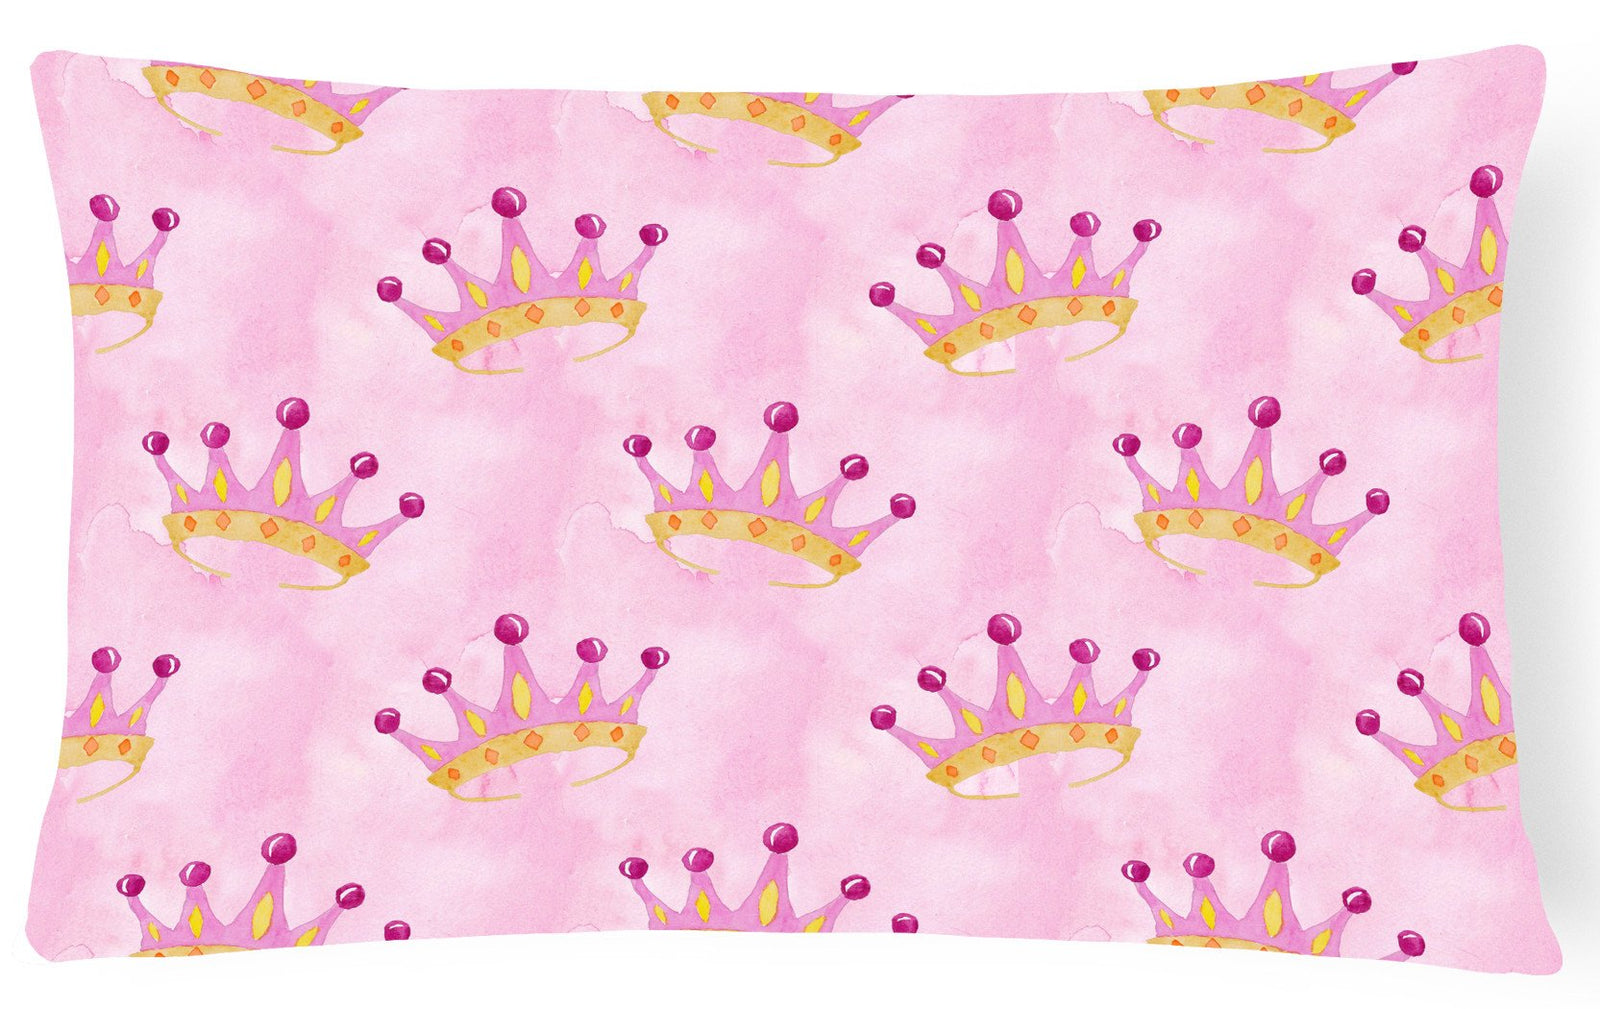 Watercolor Princess Crown on Pink Canvas Fabric Decorative Pillow BB7546PW1216 by Caroline's Treasures